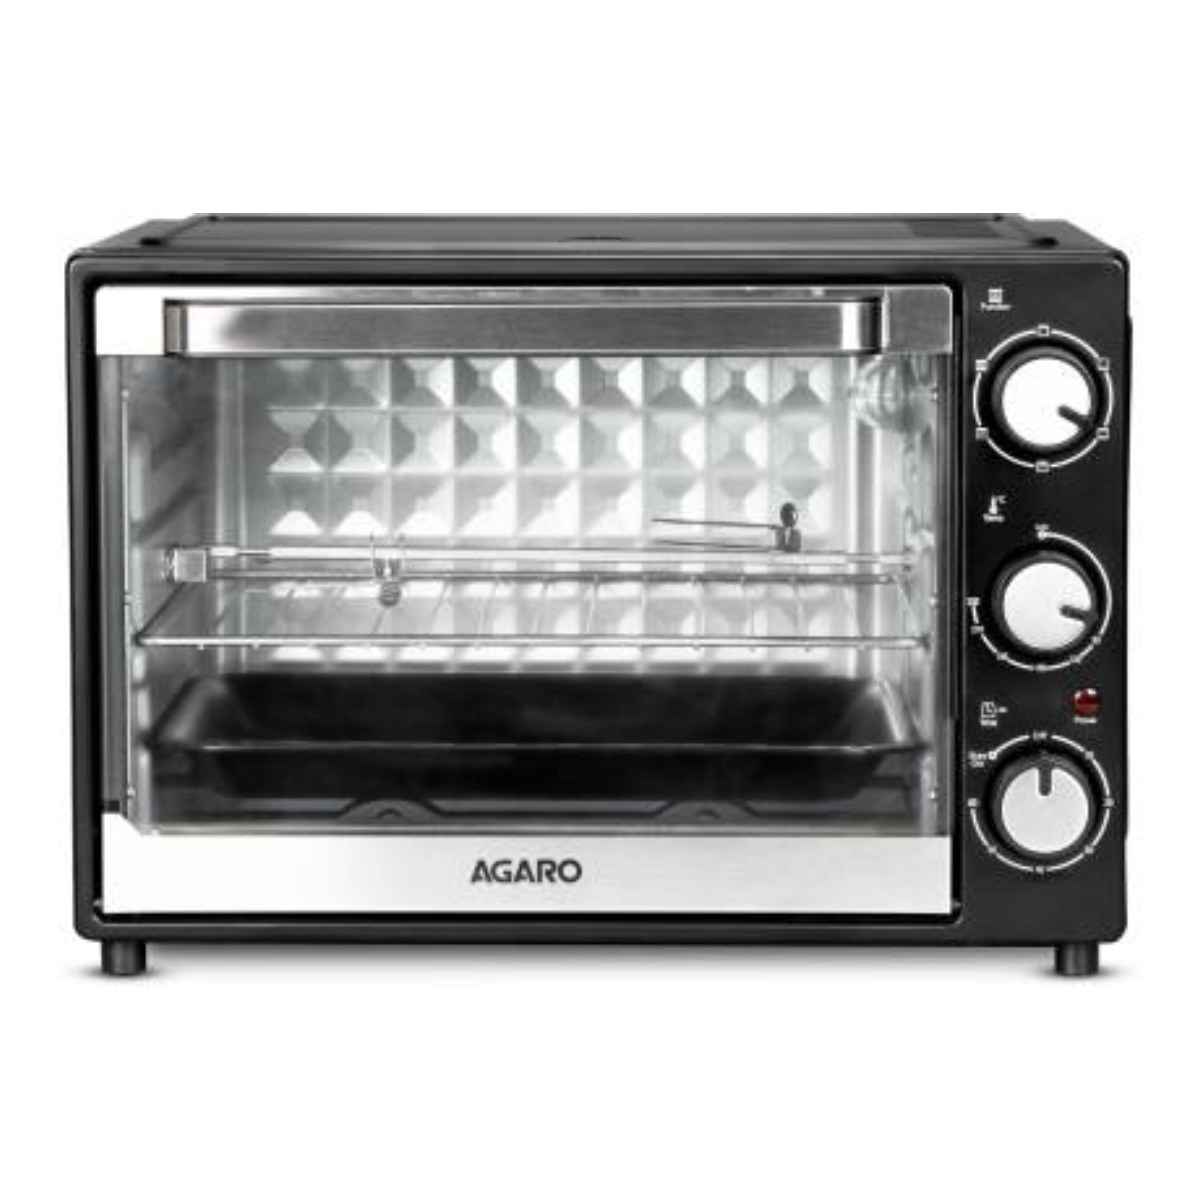 AGARO 40-Litre 33394 Oven Toaster Grill 